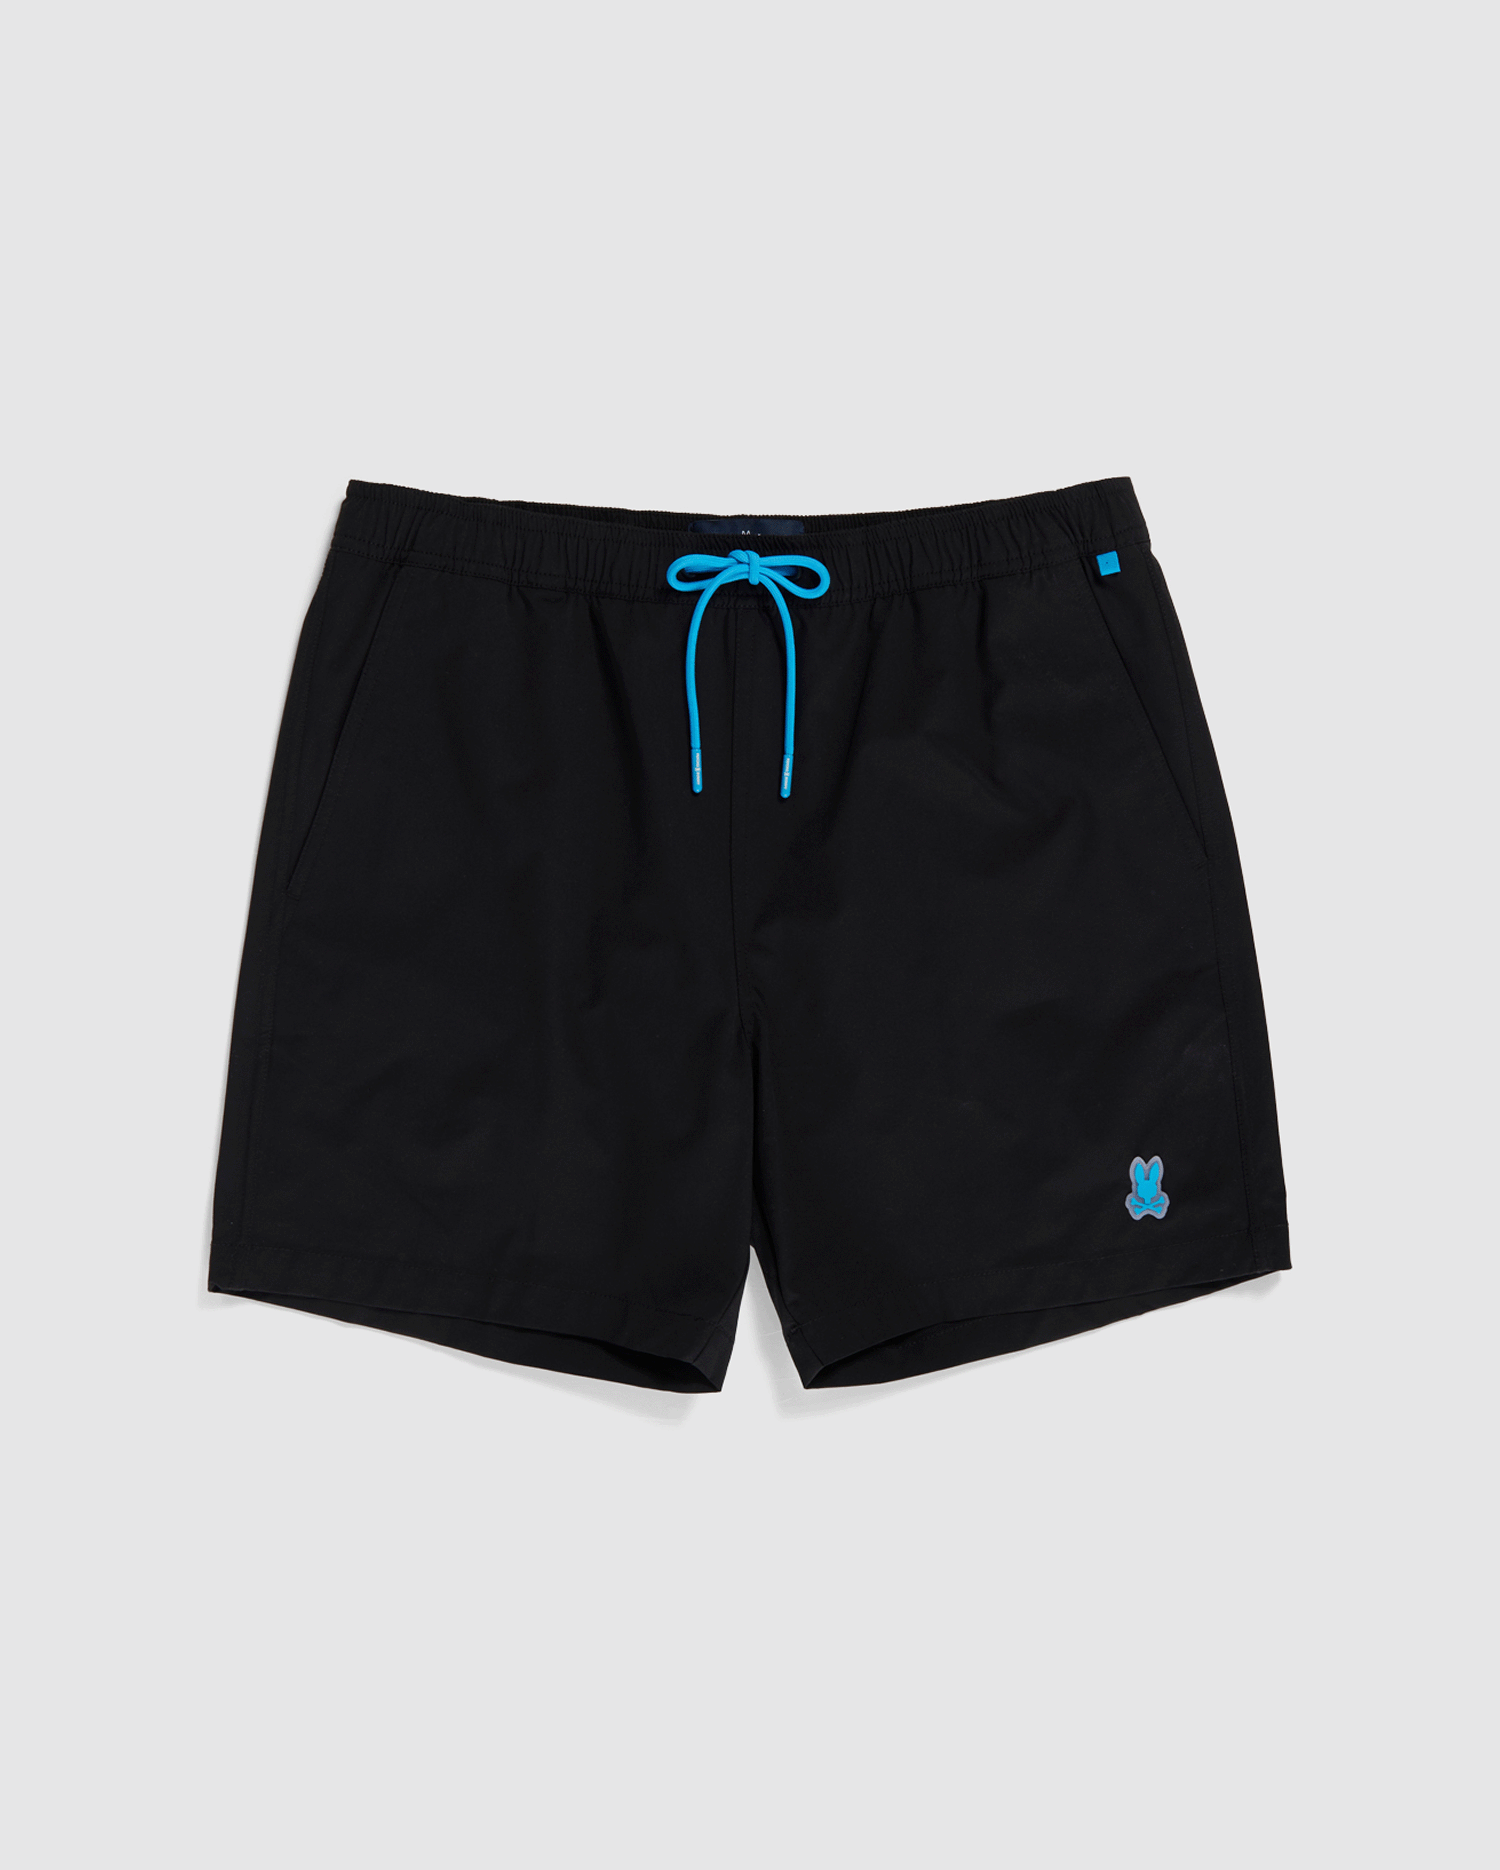 Color changing Psycho Bunny shorts, now available exclusively instore!  LIMITED QUANTITIES!